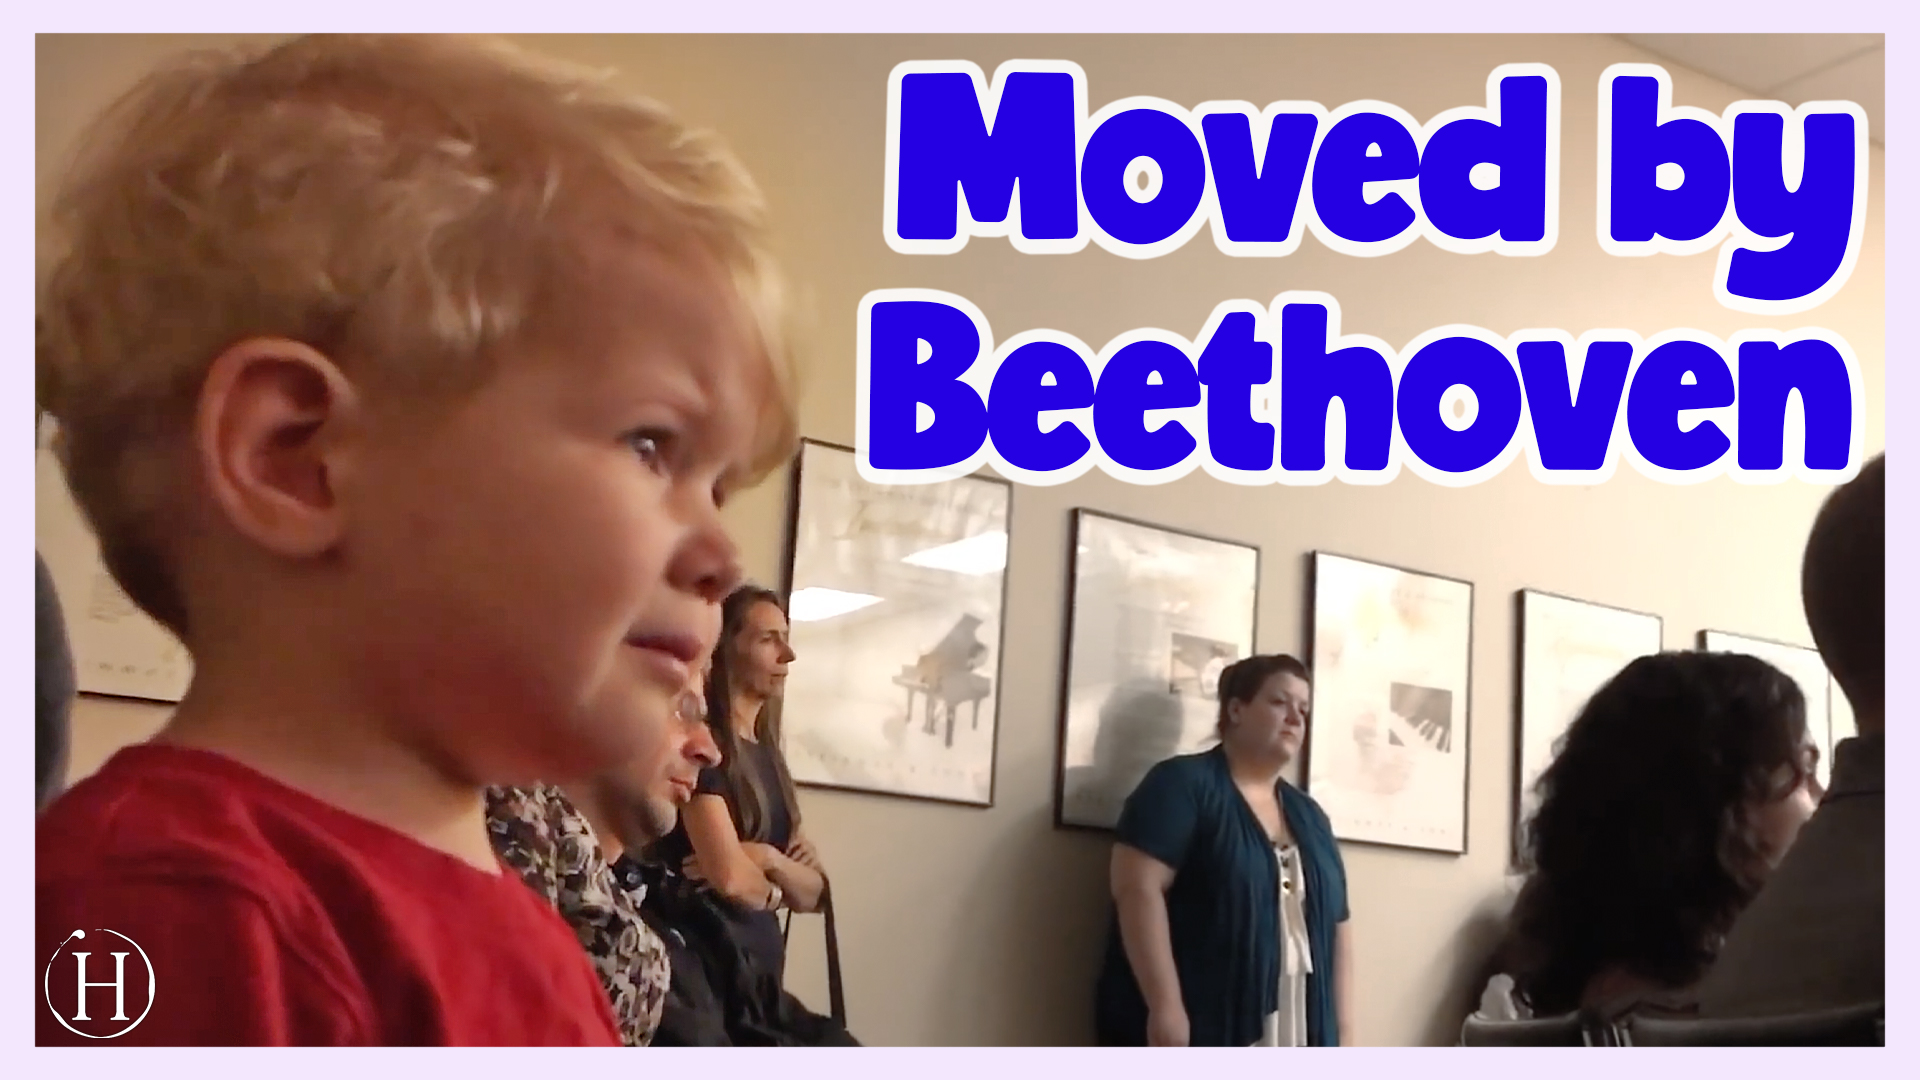 Toddler Moved To Tears Hearing Beethoven's Moonlight Sonata for First Time | Humanity Life